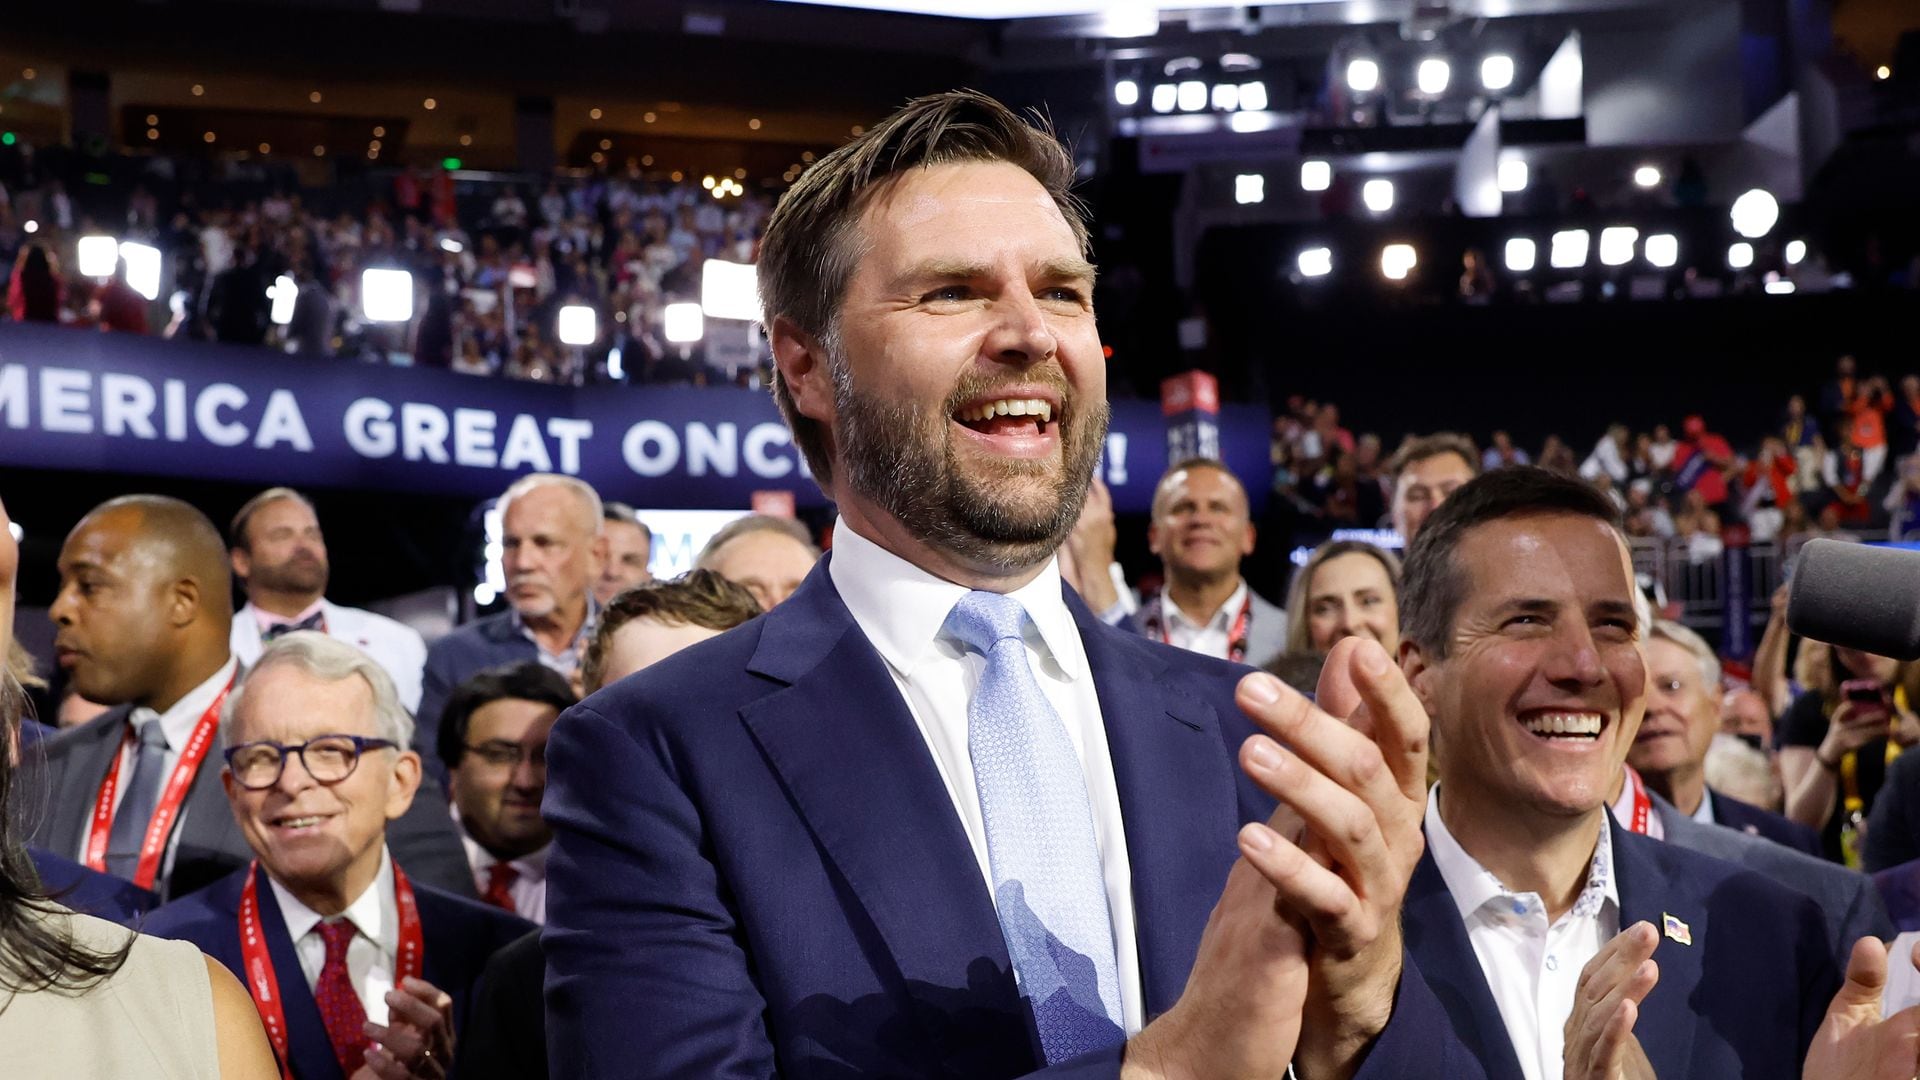 What to know about 'Hillbilly Elegy,' the movie based on J.D. Vance's life